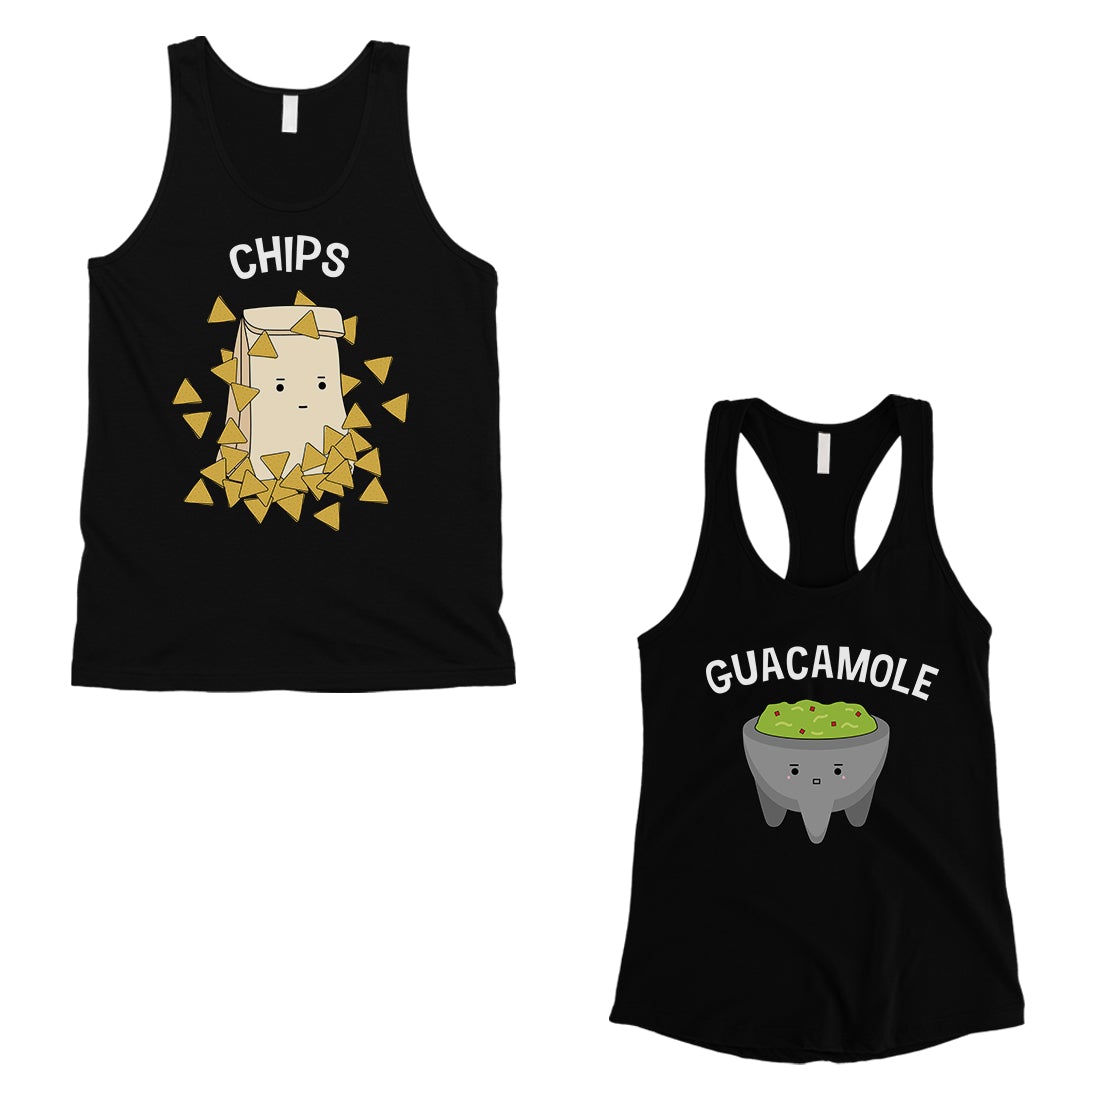 Chips & Guacamole Matching Couple Tank Tops Funny Wedding Gift Black